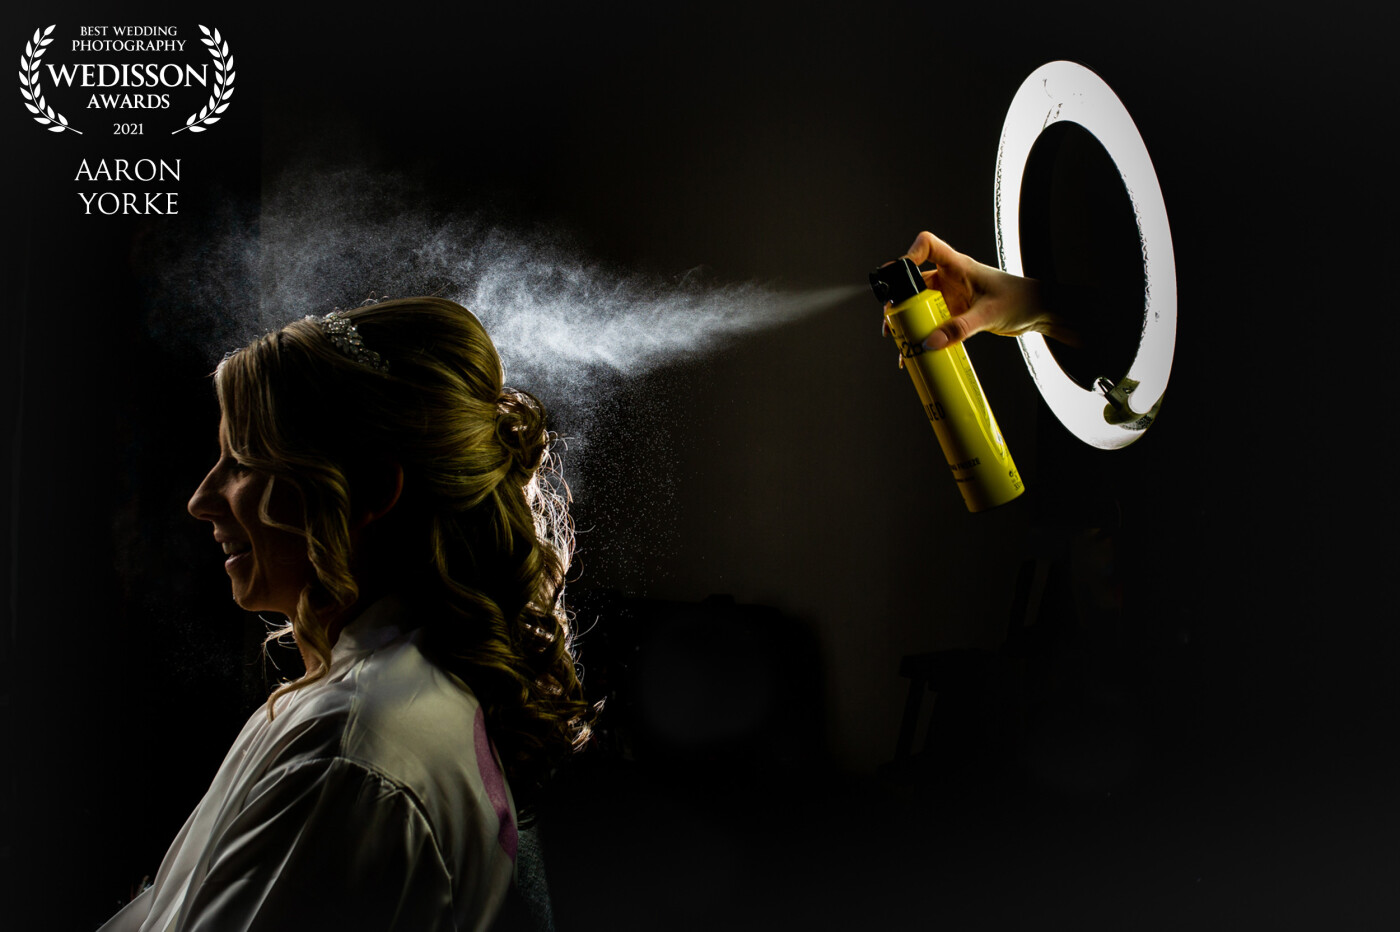 I was inspired to create a hair spray shot with a difference. So using the make-up artists ring light I asked her to placed her had through and spray. I love the yellow can and using a light to capture the spray behind the bride was a great way to black out the rest of the room.